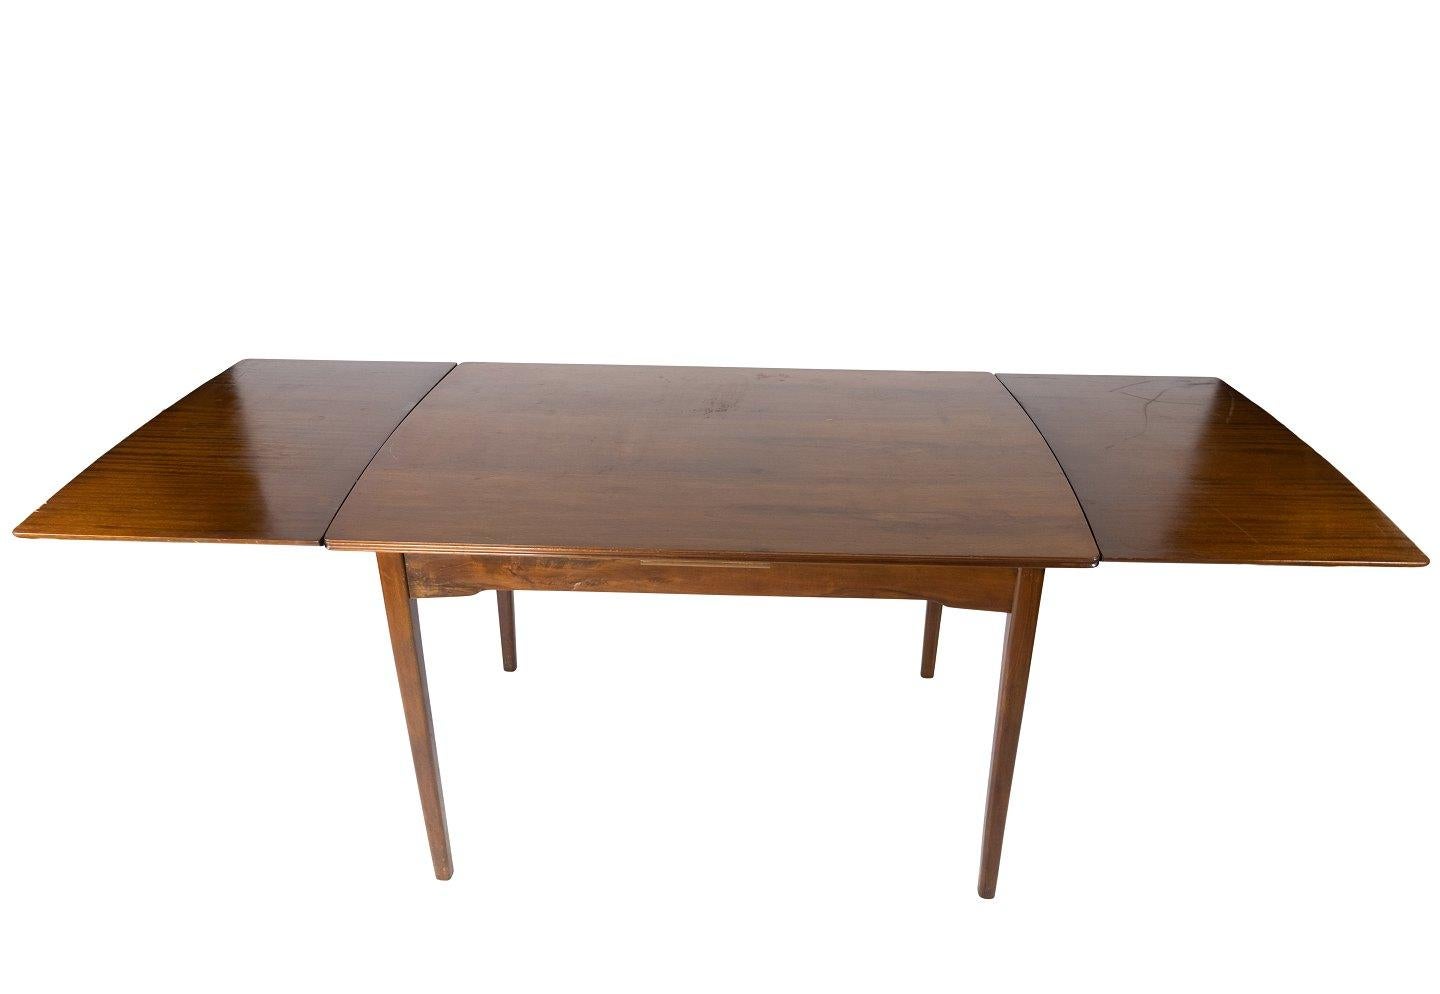 Mid-Century Modern Dining Table Made In Walnut With Extension, Danish Design From 1960s For Sale